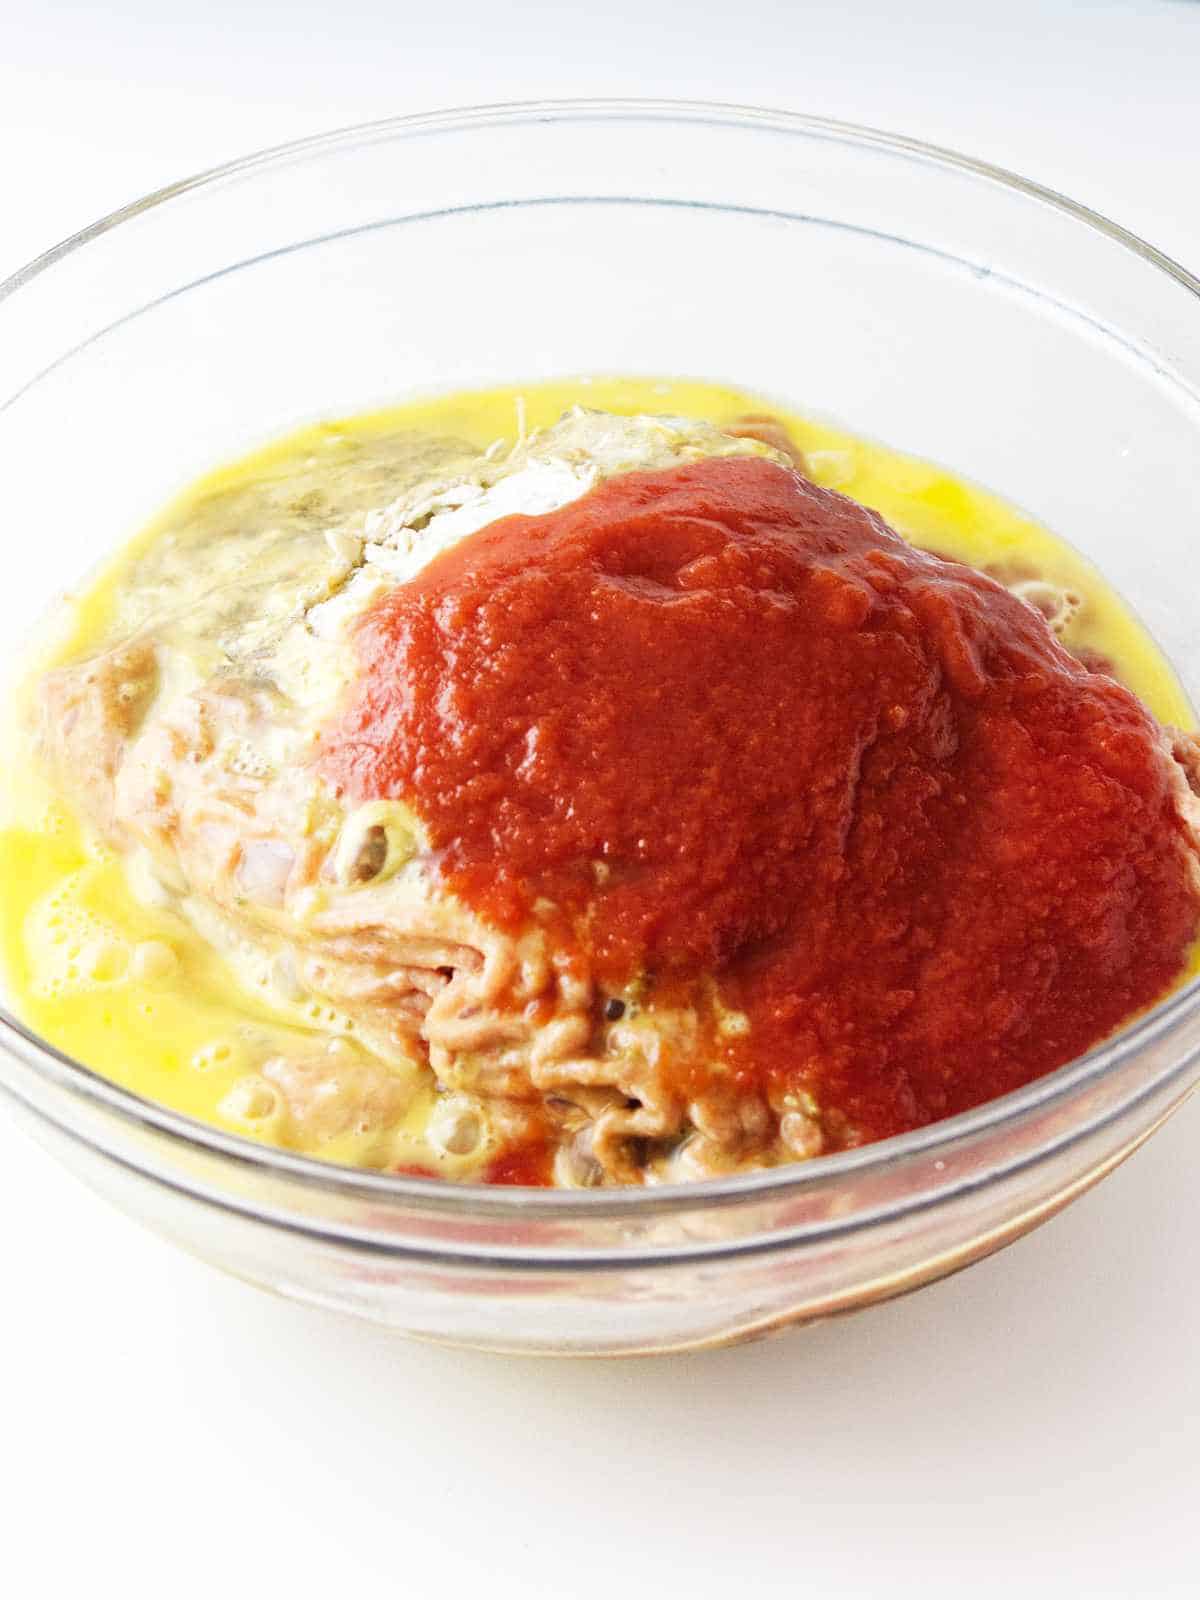 egg and tomato sauce added to ground turkey in bowl.